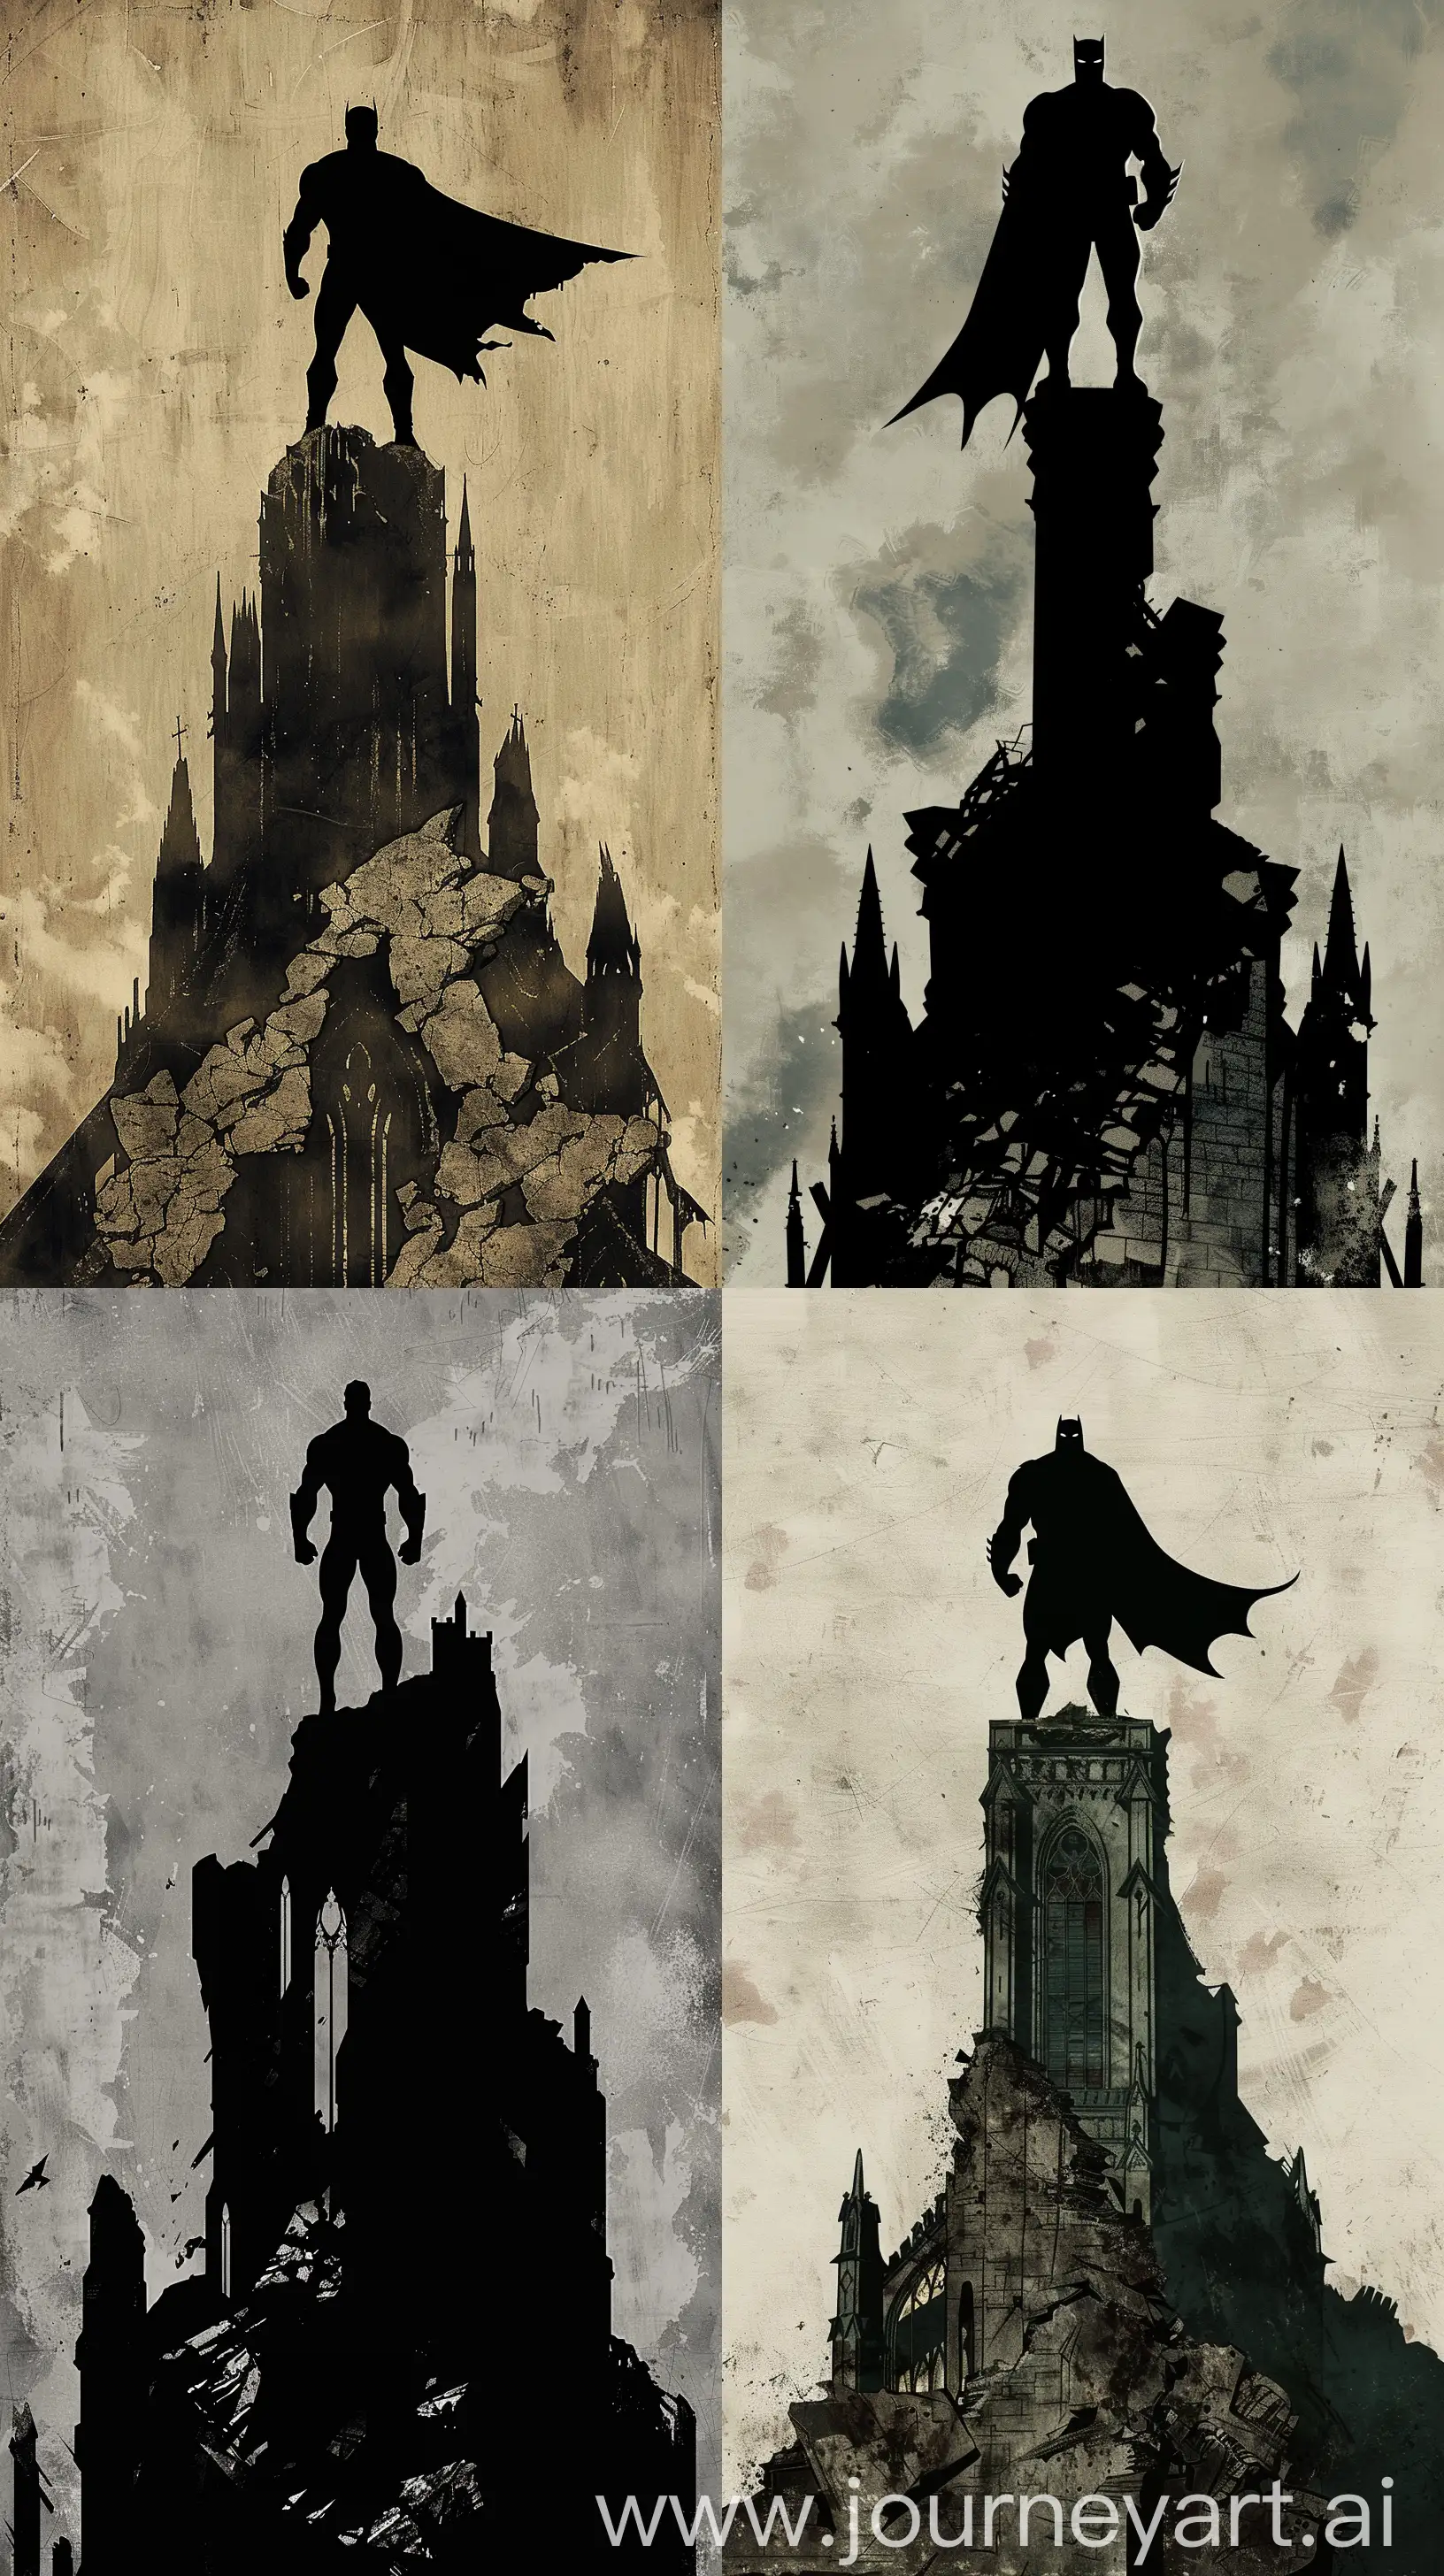 Illustrate a brooding superhero standing atop a crumbling gothic cathedral, with Robert colescott art signature use of heavy shadows and stark contrasts. The character's silhouette should be bold and simple, yet convey a sense of mysterious power --ar 9:16